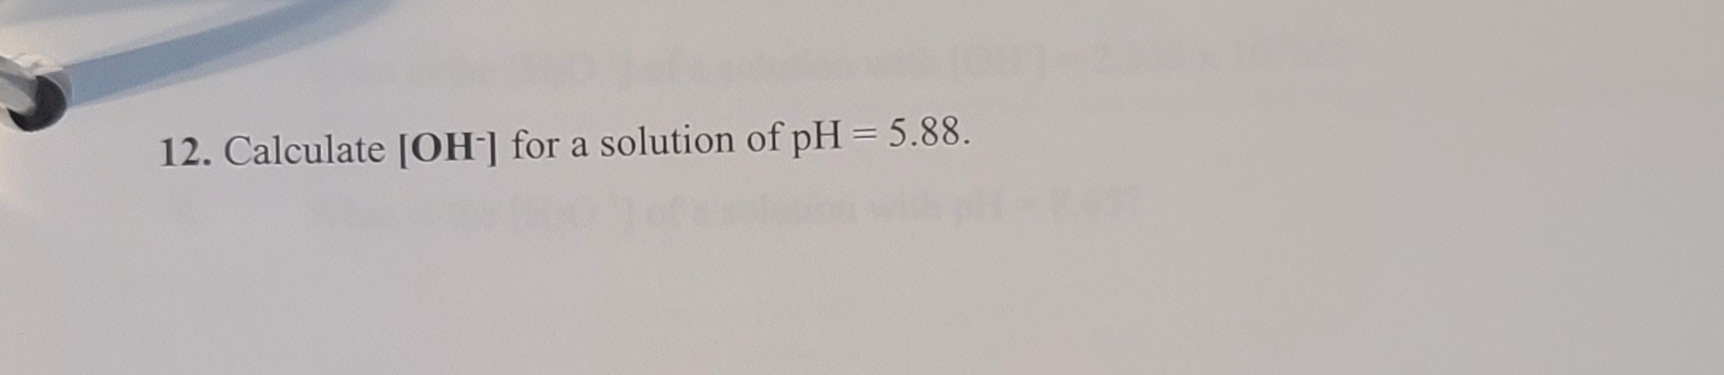 12. Calculate [OH] for a solution of pH = 5.88.
